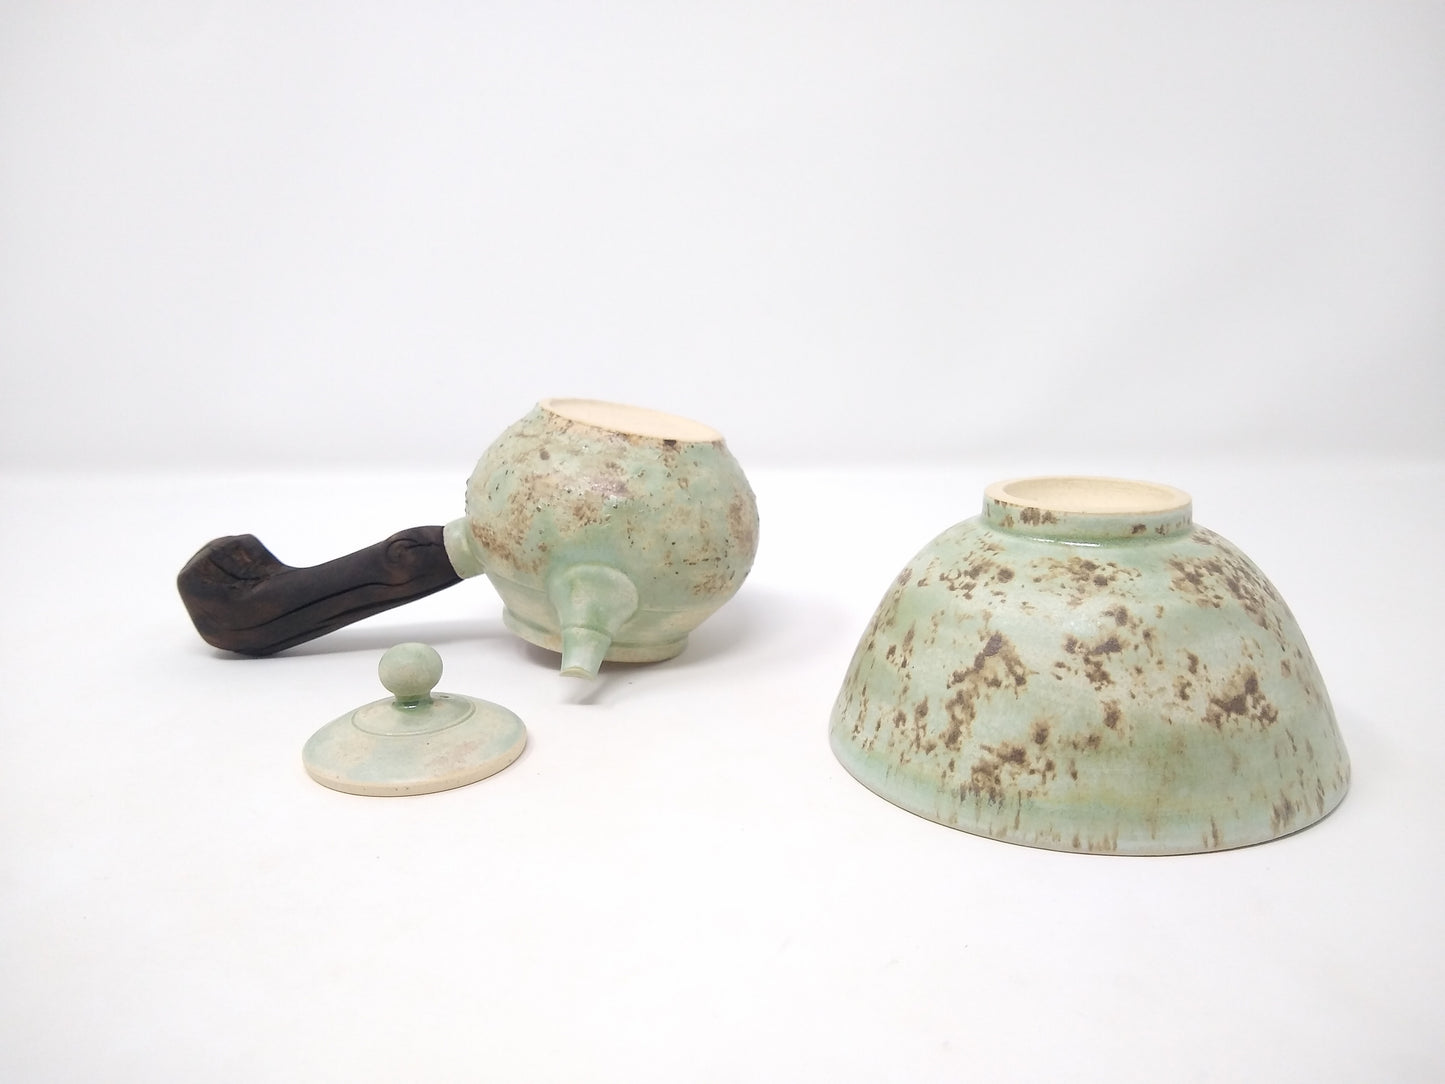 180ml "Emerald Mist" Kyusu with a matching bowl